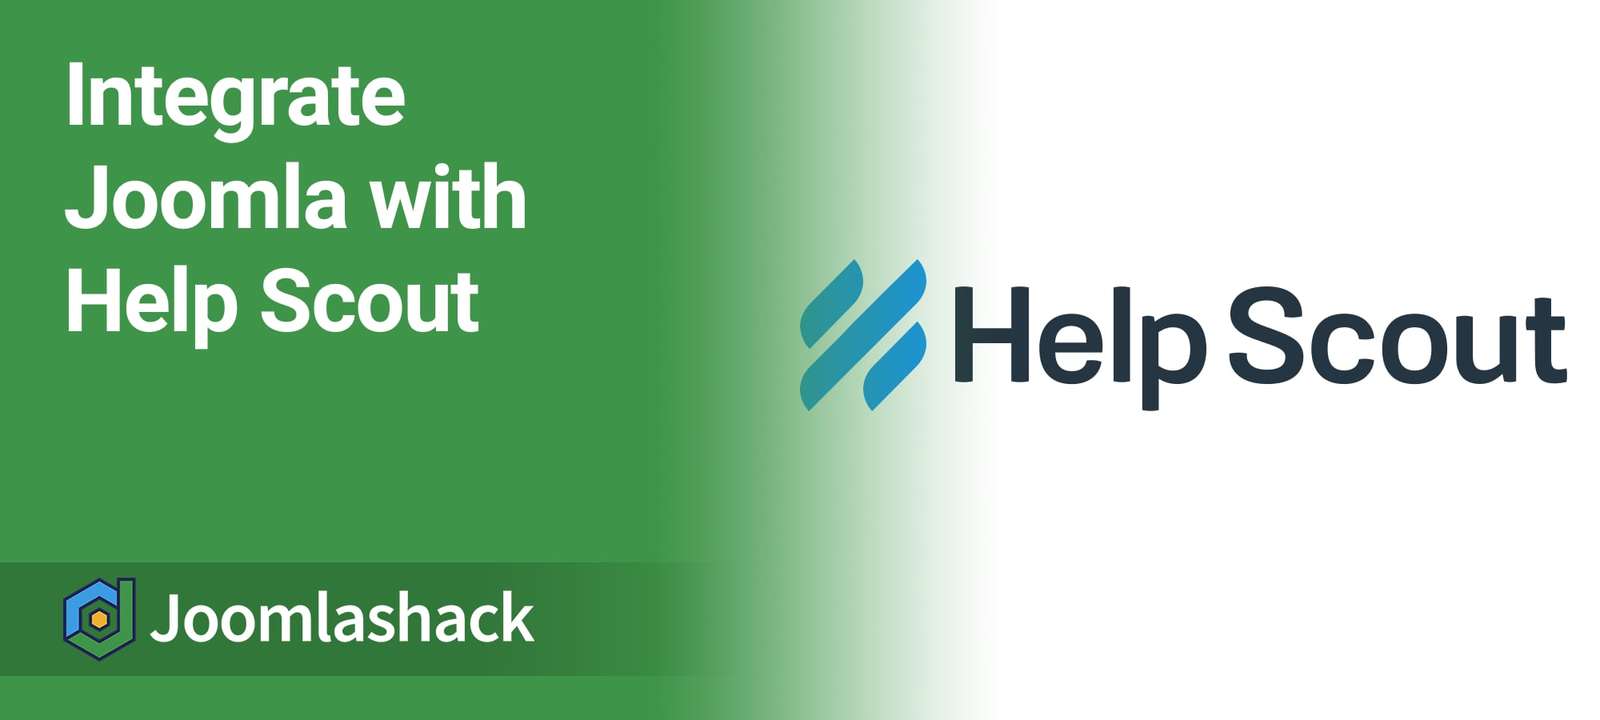 Shack HelpScout is Now Live at JoomlashackShack HelpScout is Now Live at Joomlashack